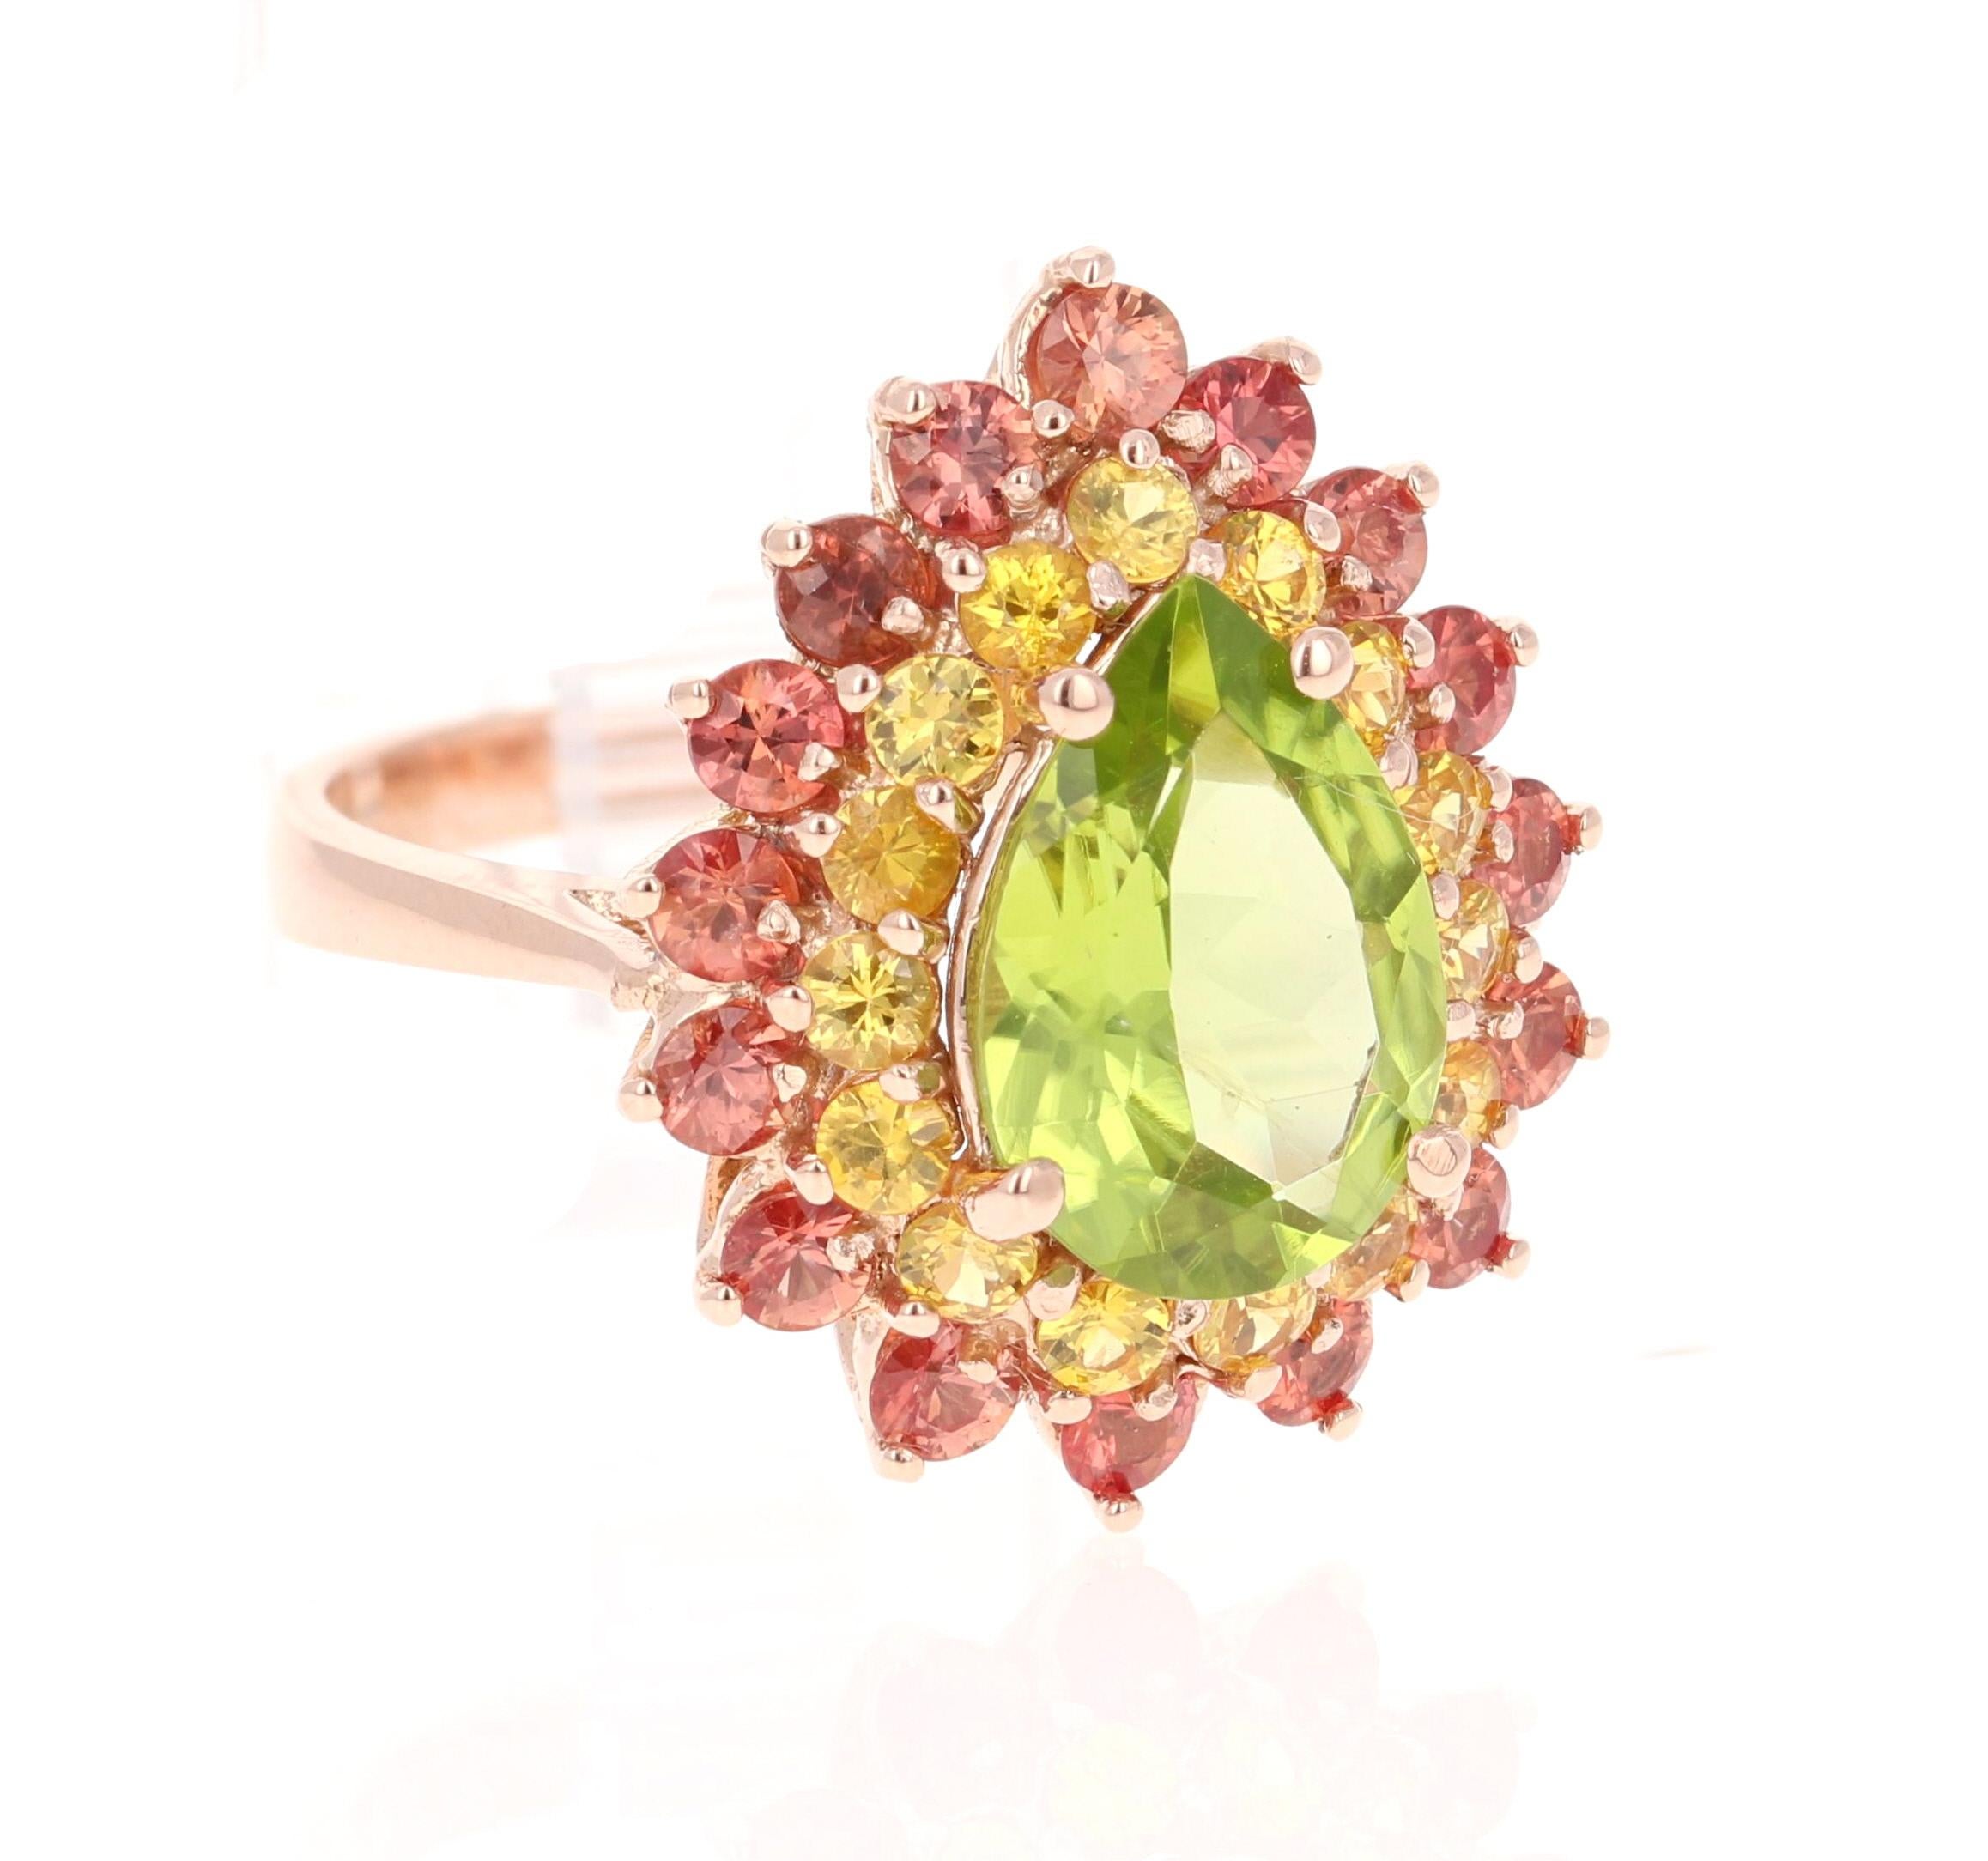 4.76 Carat Natural Peridot Red and Yellow Sapphire Rose Gold Cocktail Ring

This beautiful ring has a Pear Cut Peridot in the center that weighs 2.61 carats. The first halo is of 15 Yellow Sapphires that weigh 0.88 carats and the second halo is of